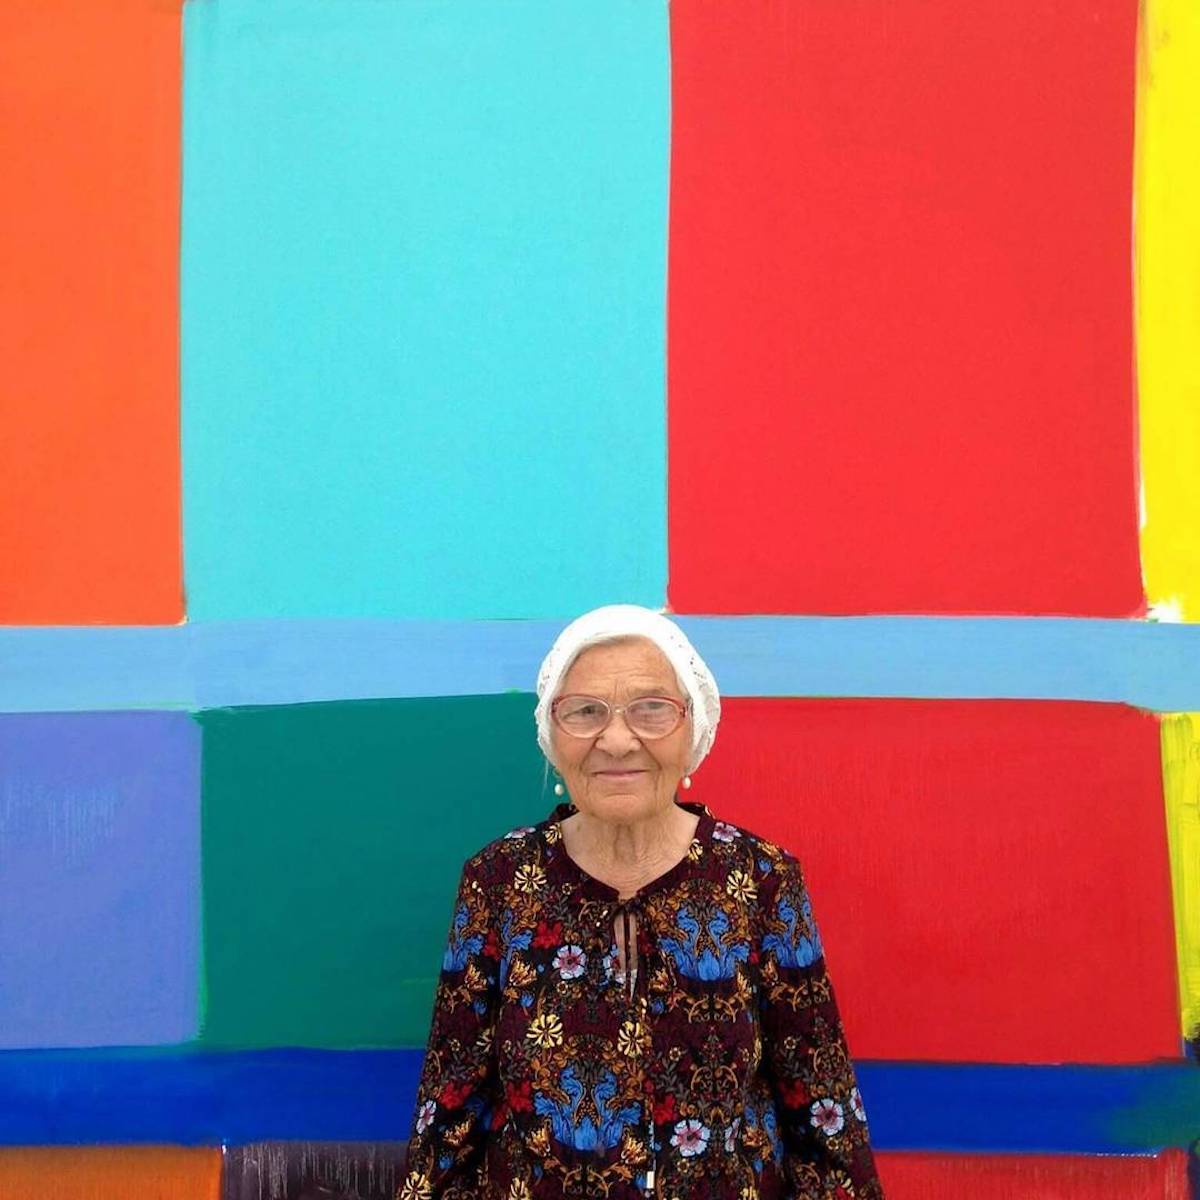 Follow of the week: travel the world with Russian grandma Lena